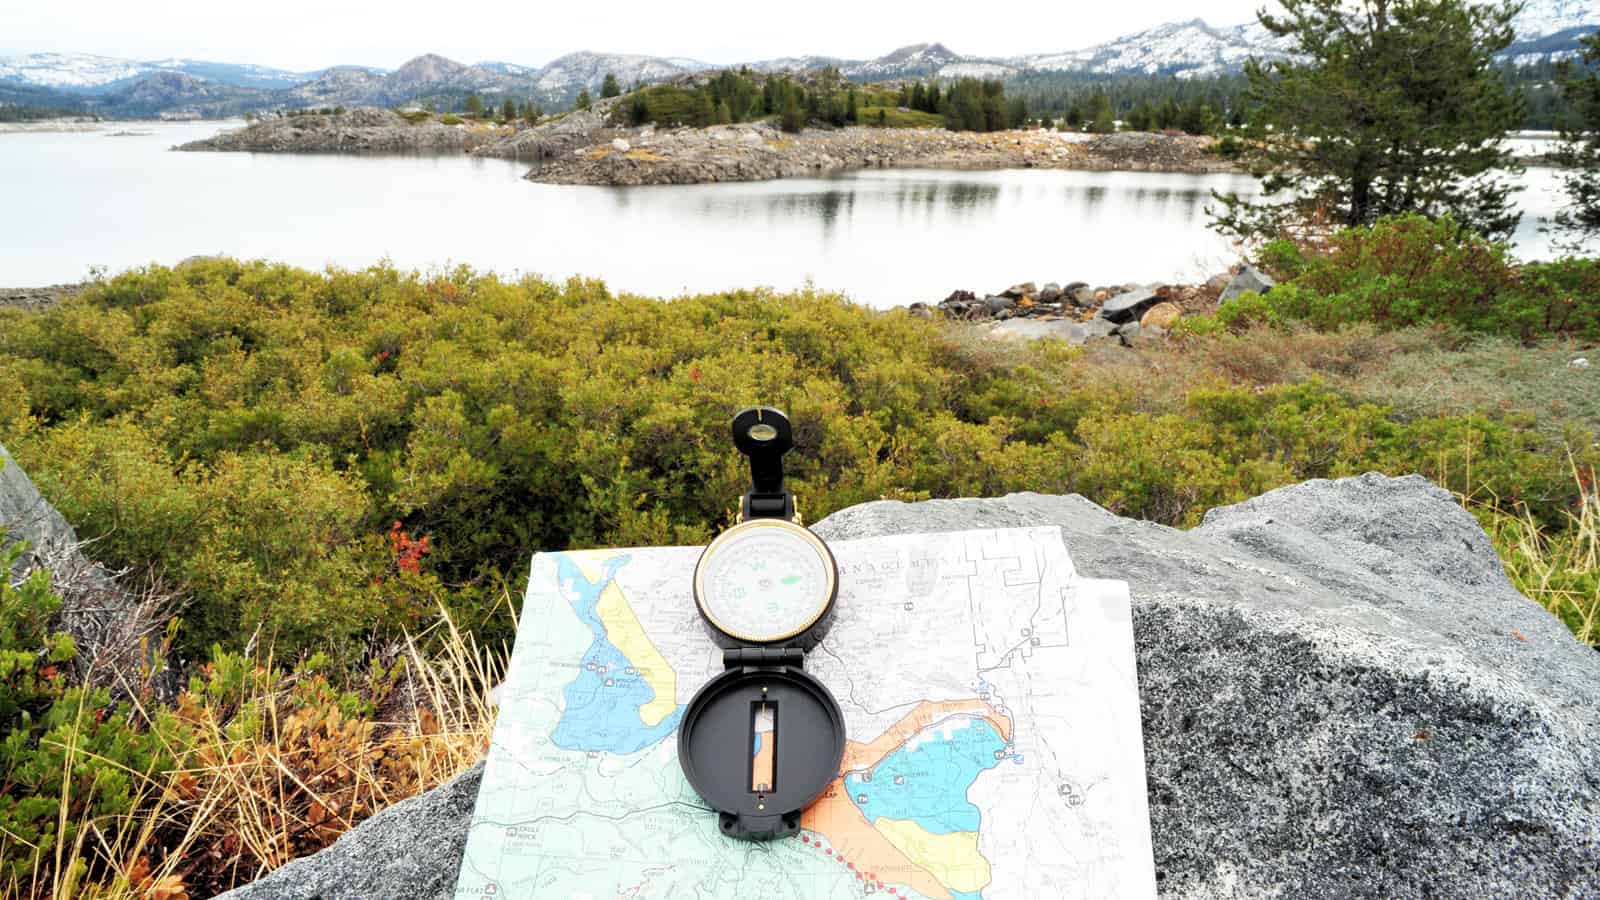 A hiking map and compass overlooking a lake in the California sierra Nevada mountains